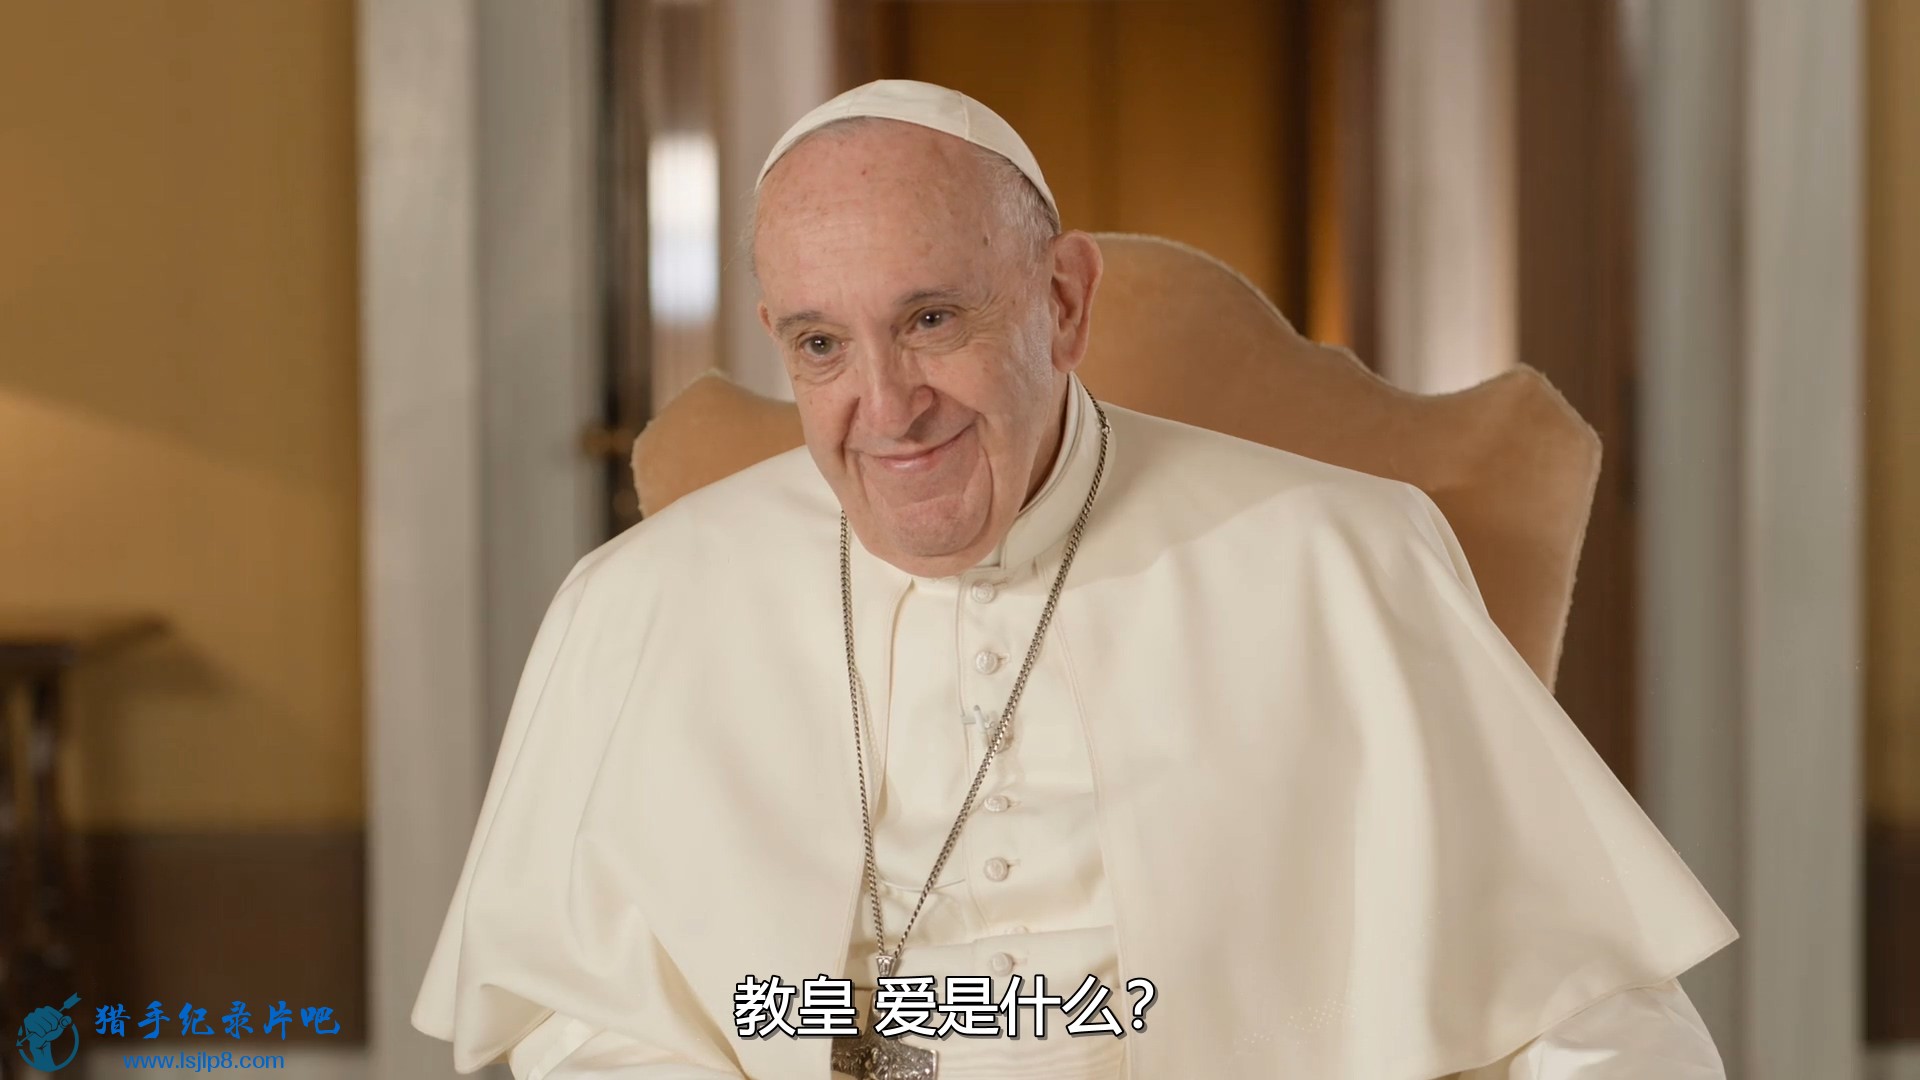 Stories.of.a.Generation.With.Pope.Francis.S01E01.Love.1080p.NF.WEB-DL.DDP5.1.H.2.jpg